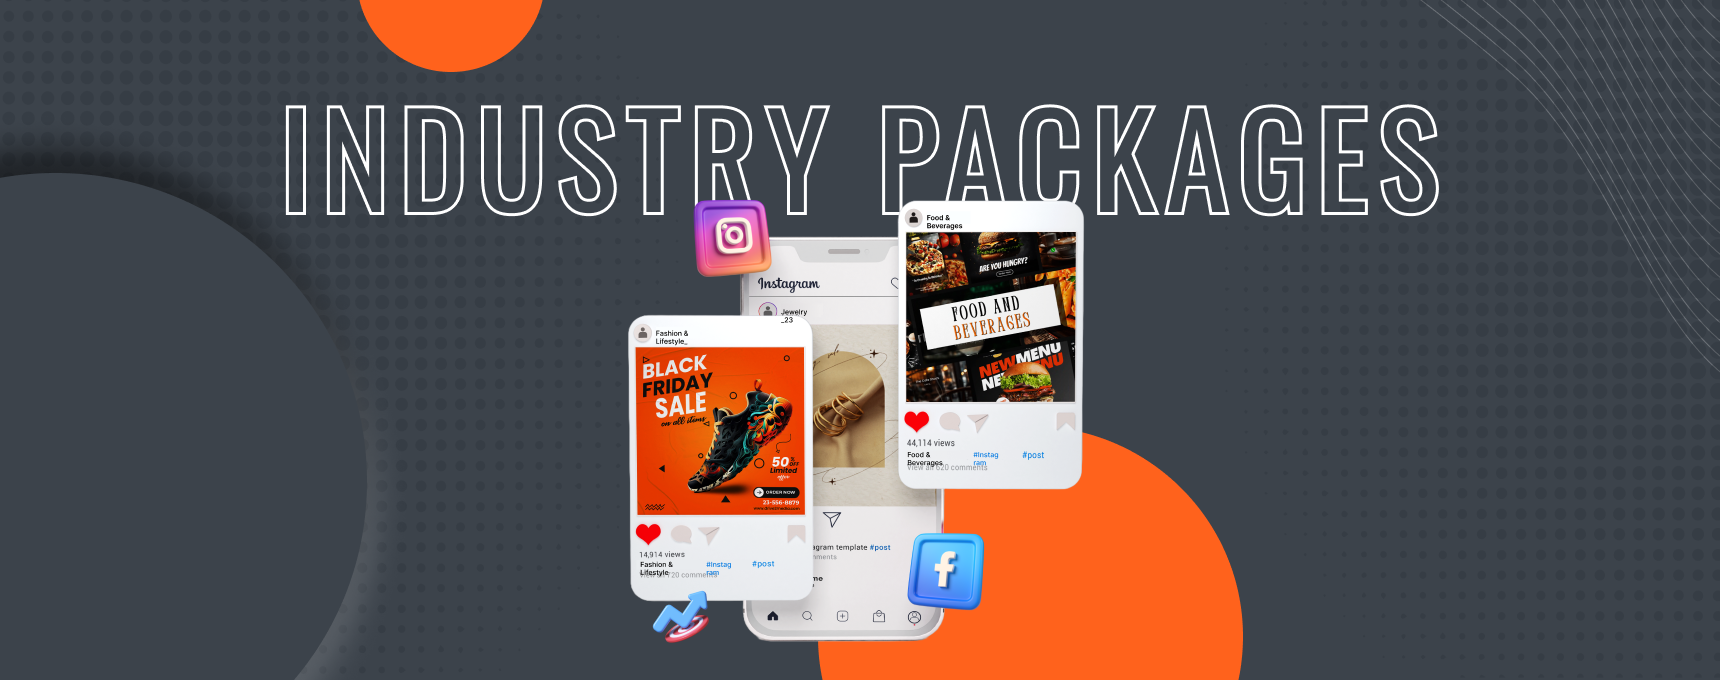 Industry packages (4)